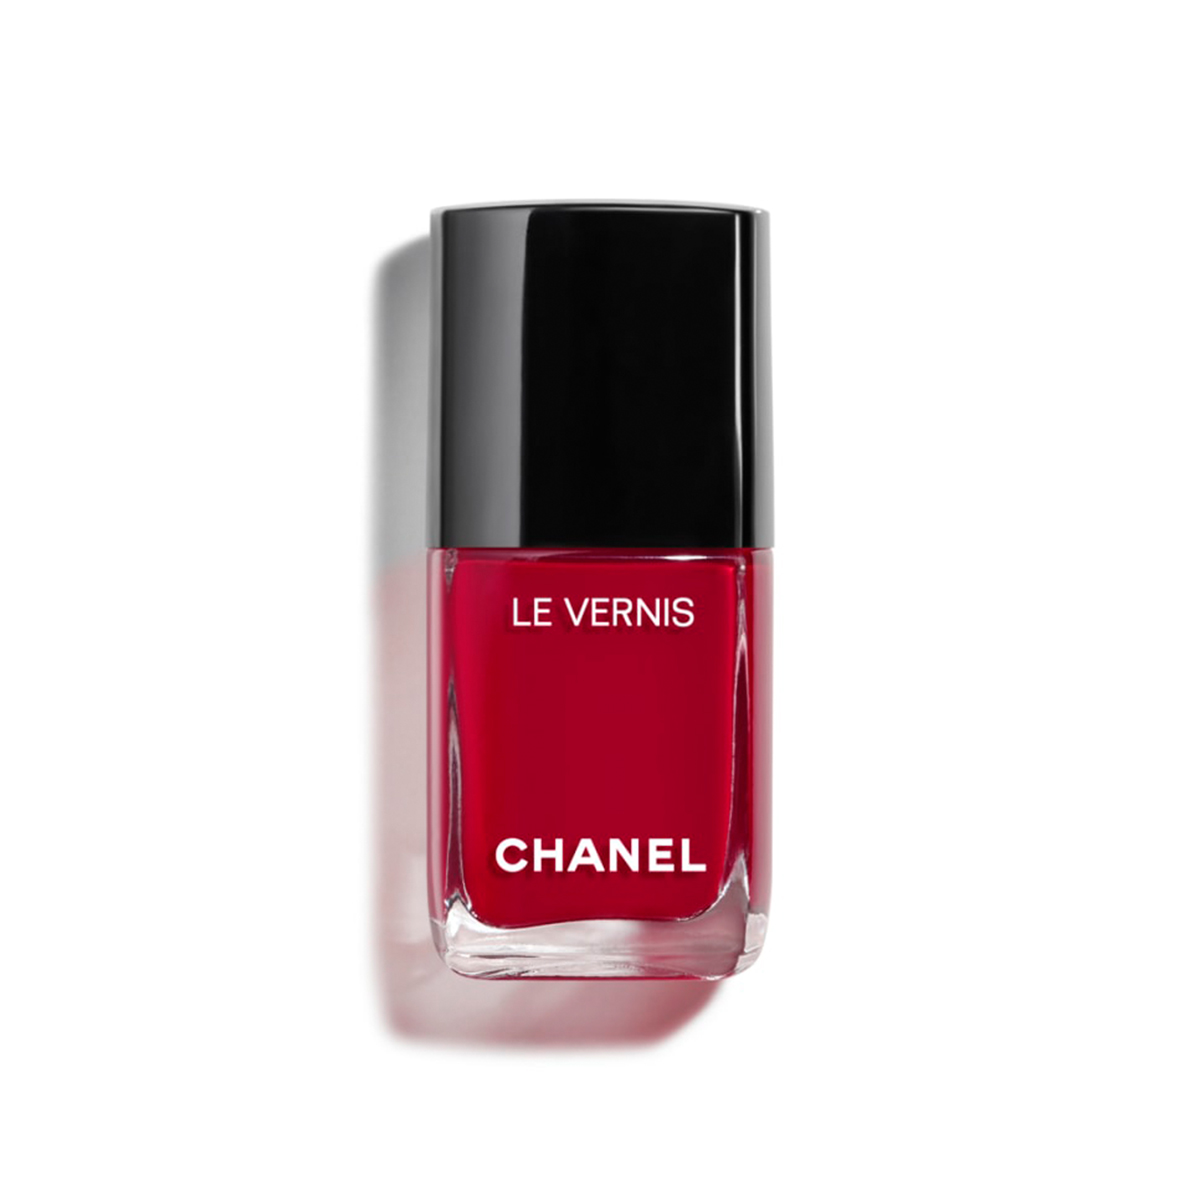 Chanel Le Vernis Longwear Nail Colour in Pirate